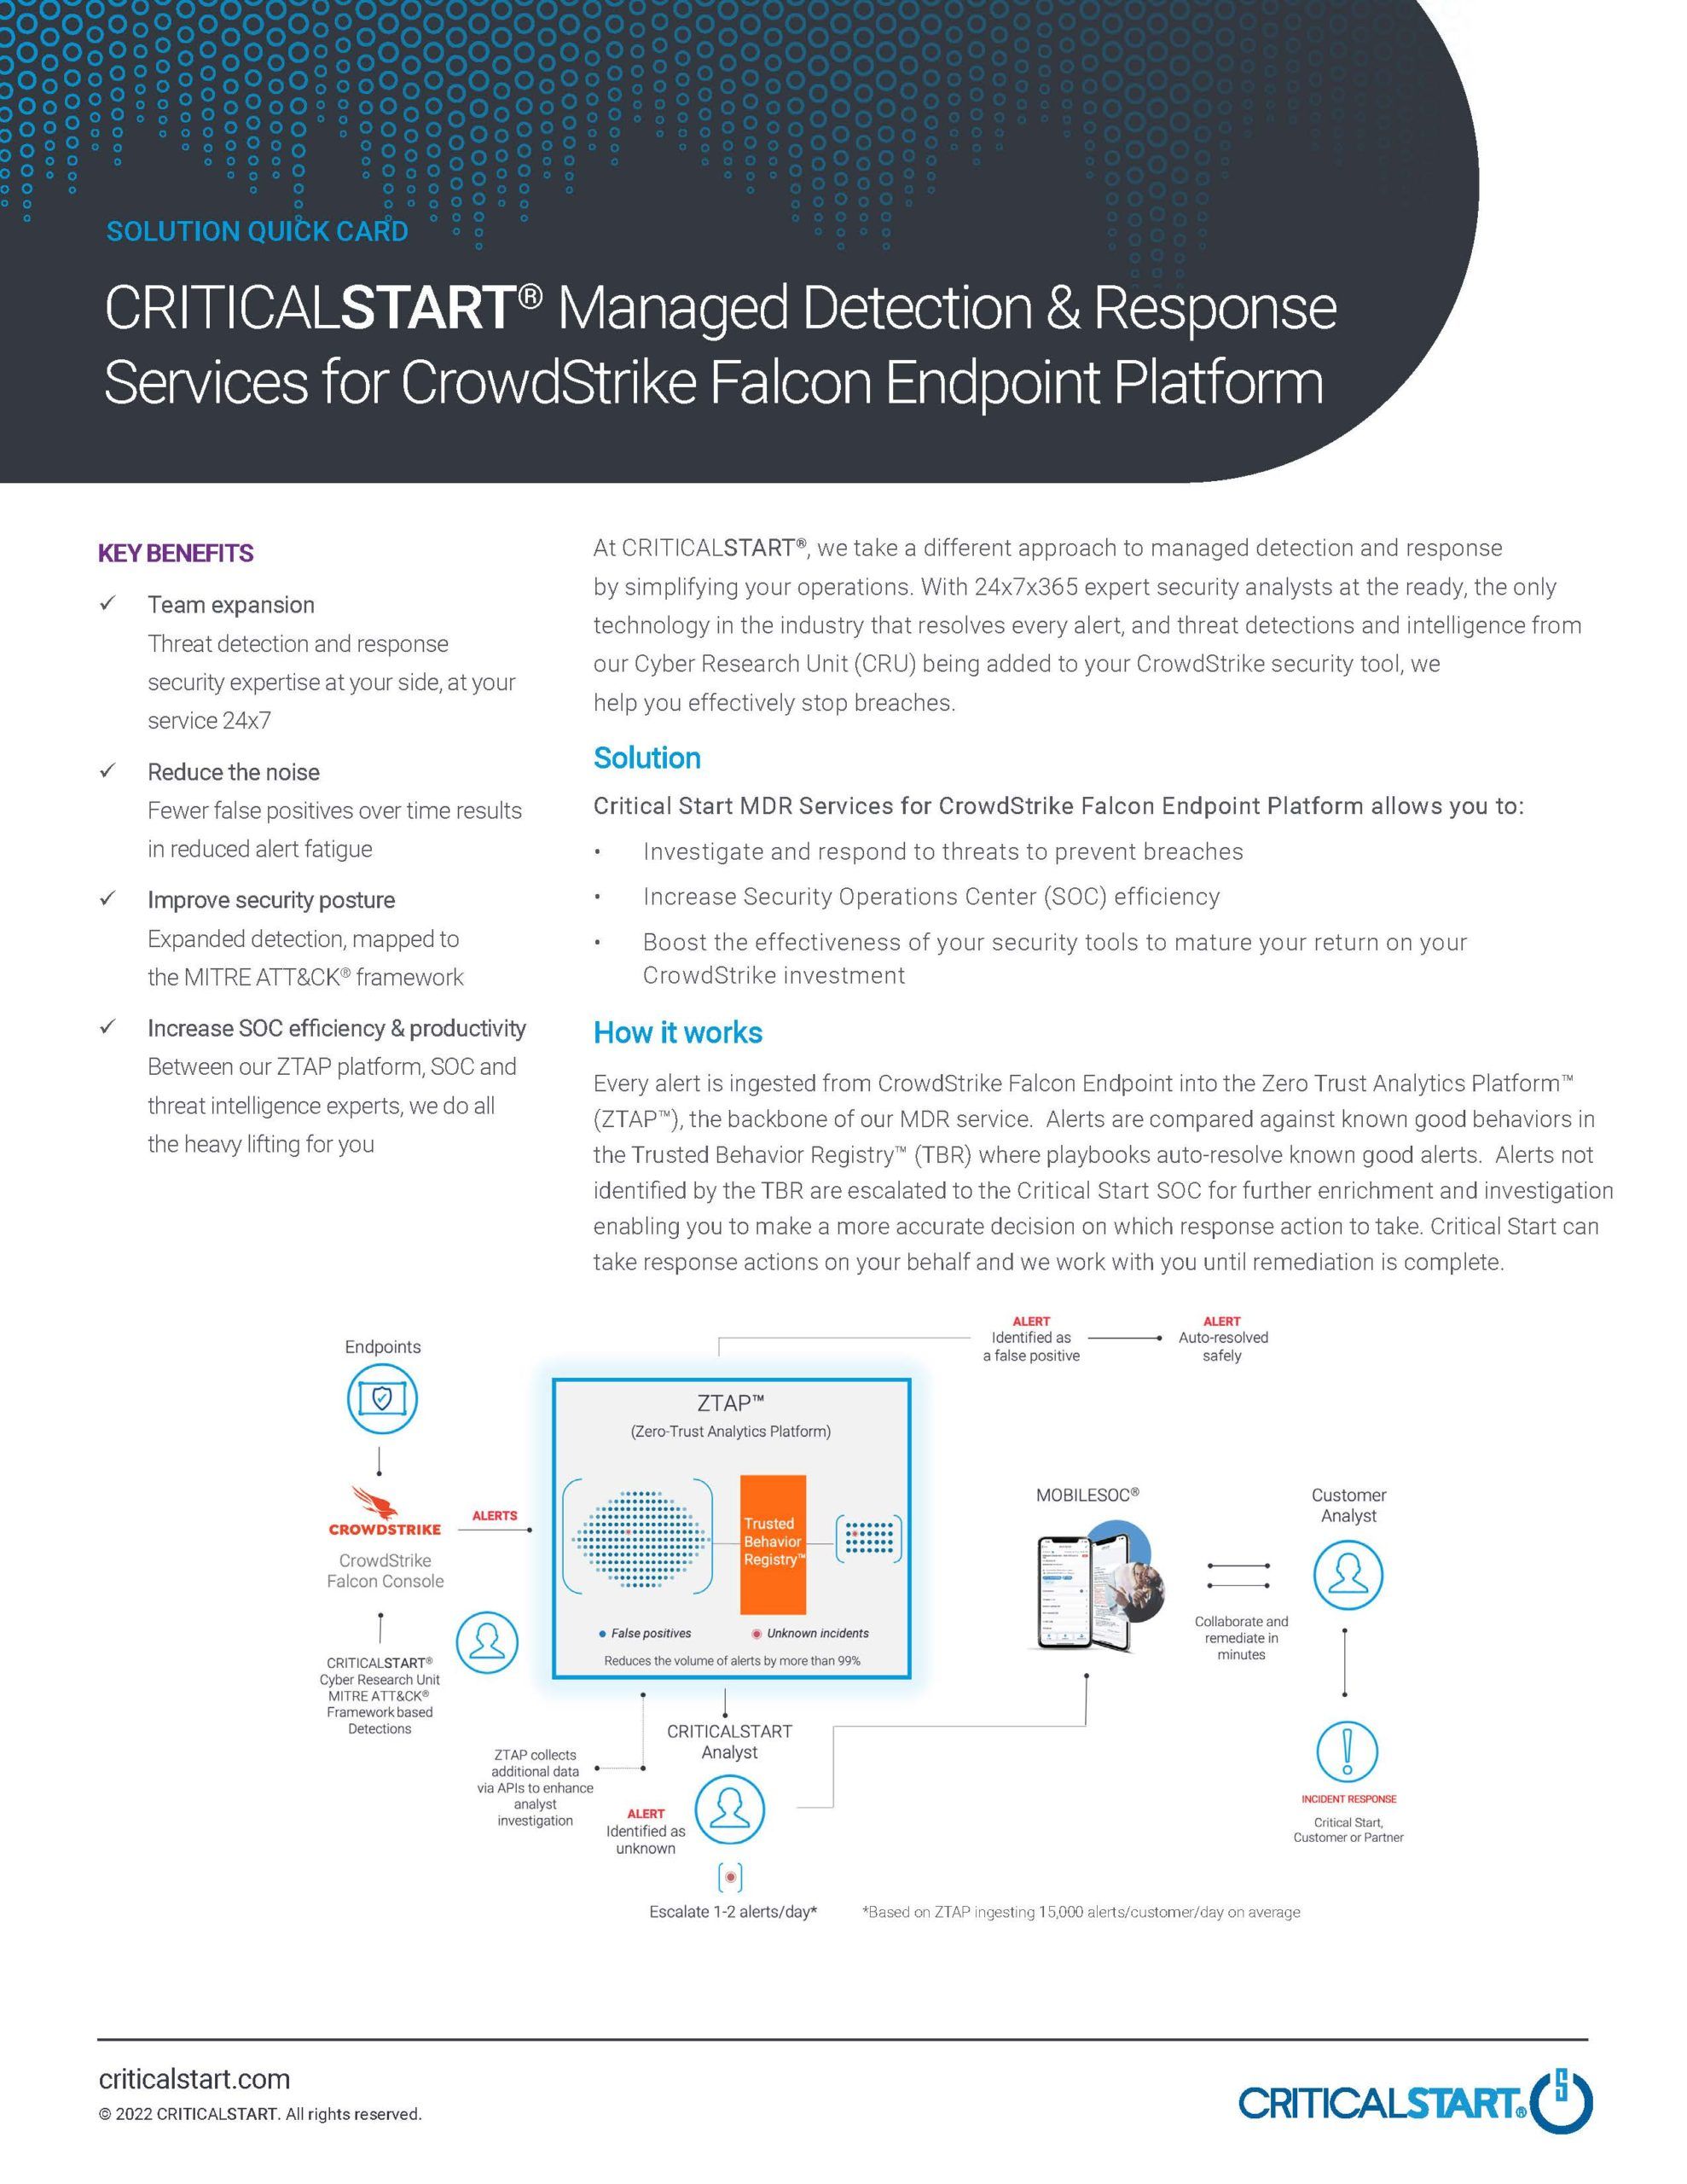 CrowdStrike managed detection and response services